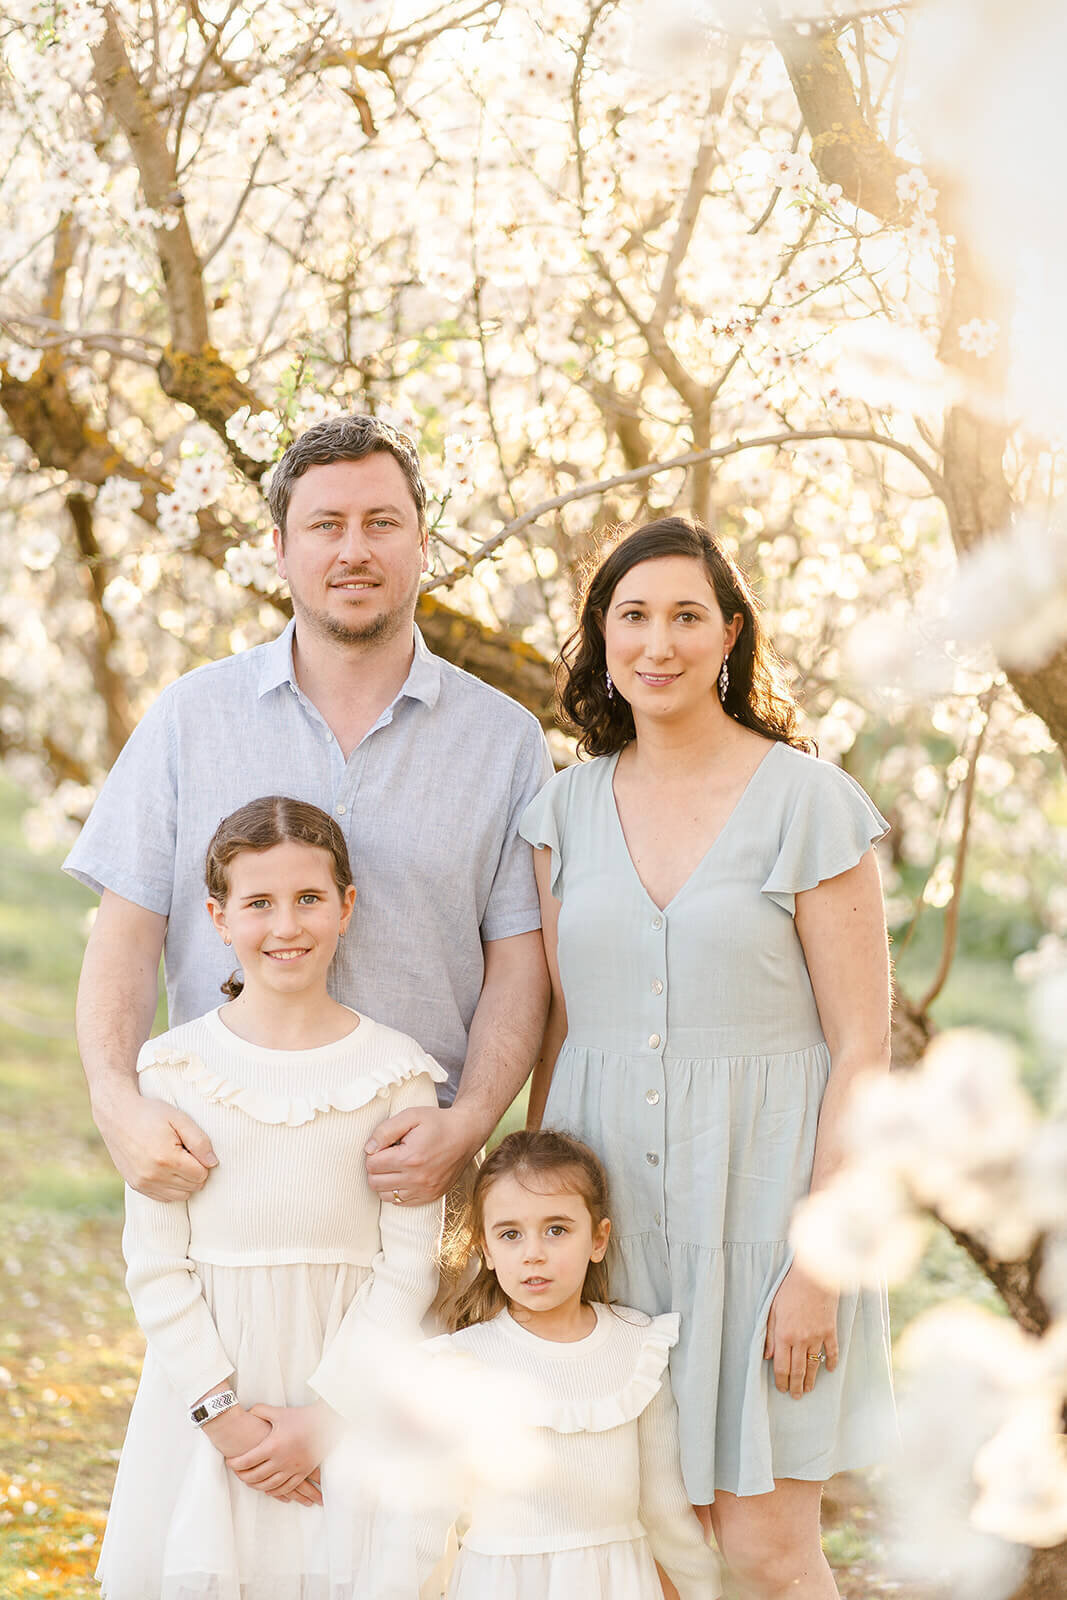 Family of 4 posing amidst blooming spring flowers in an almond blossom orchard at sunset in Brisbane